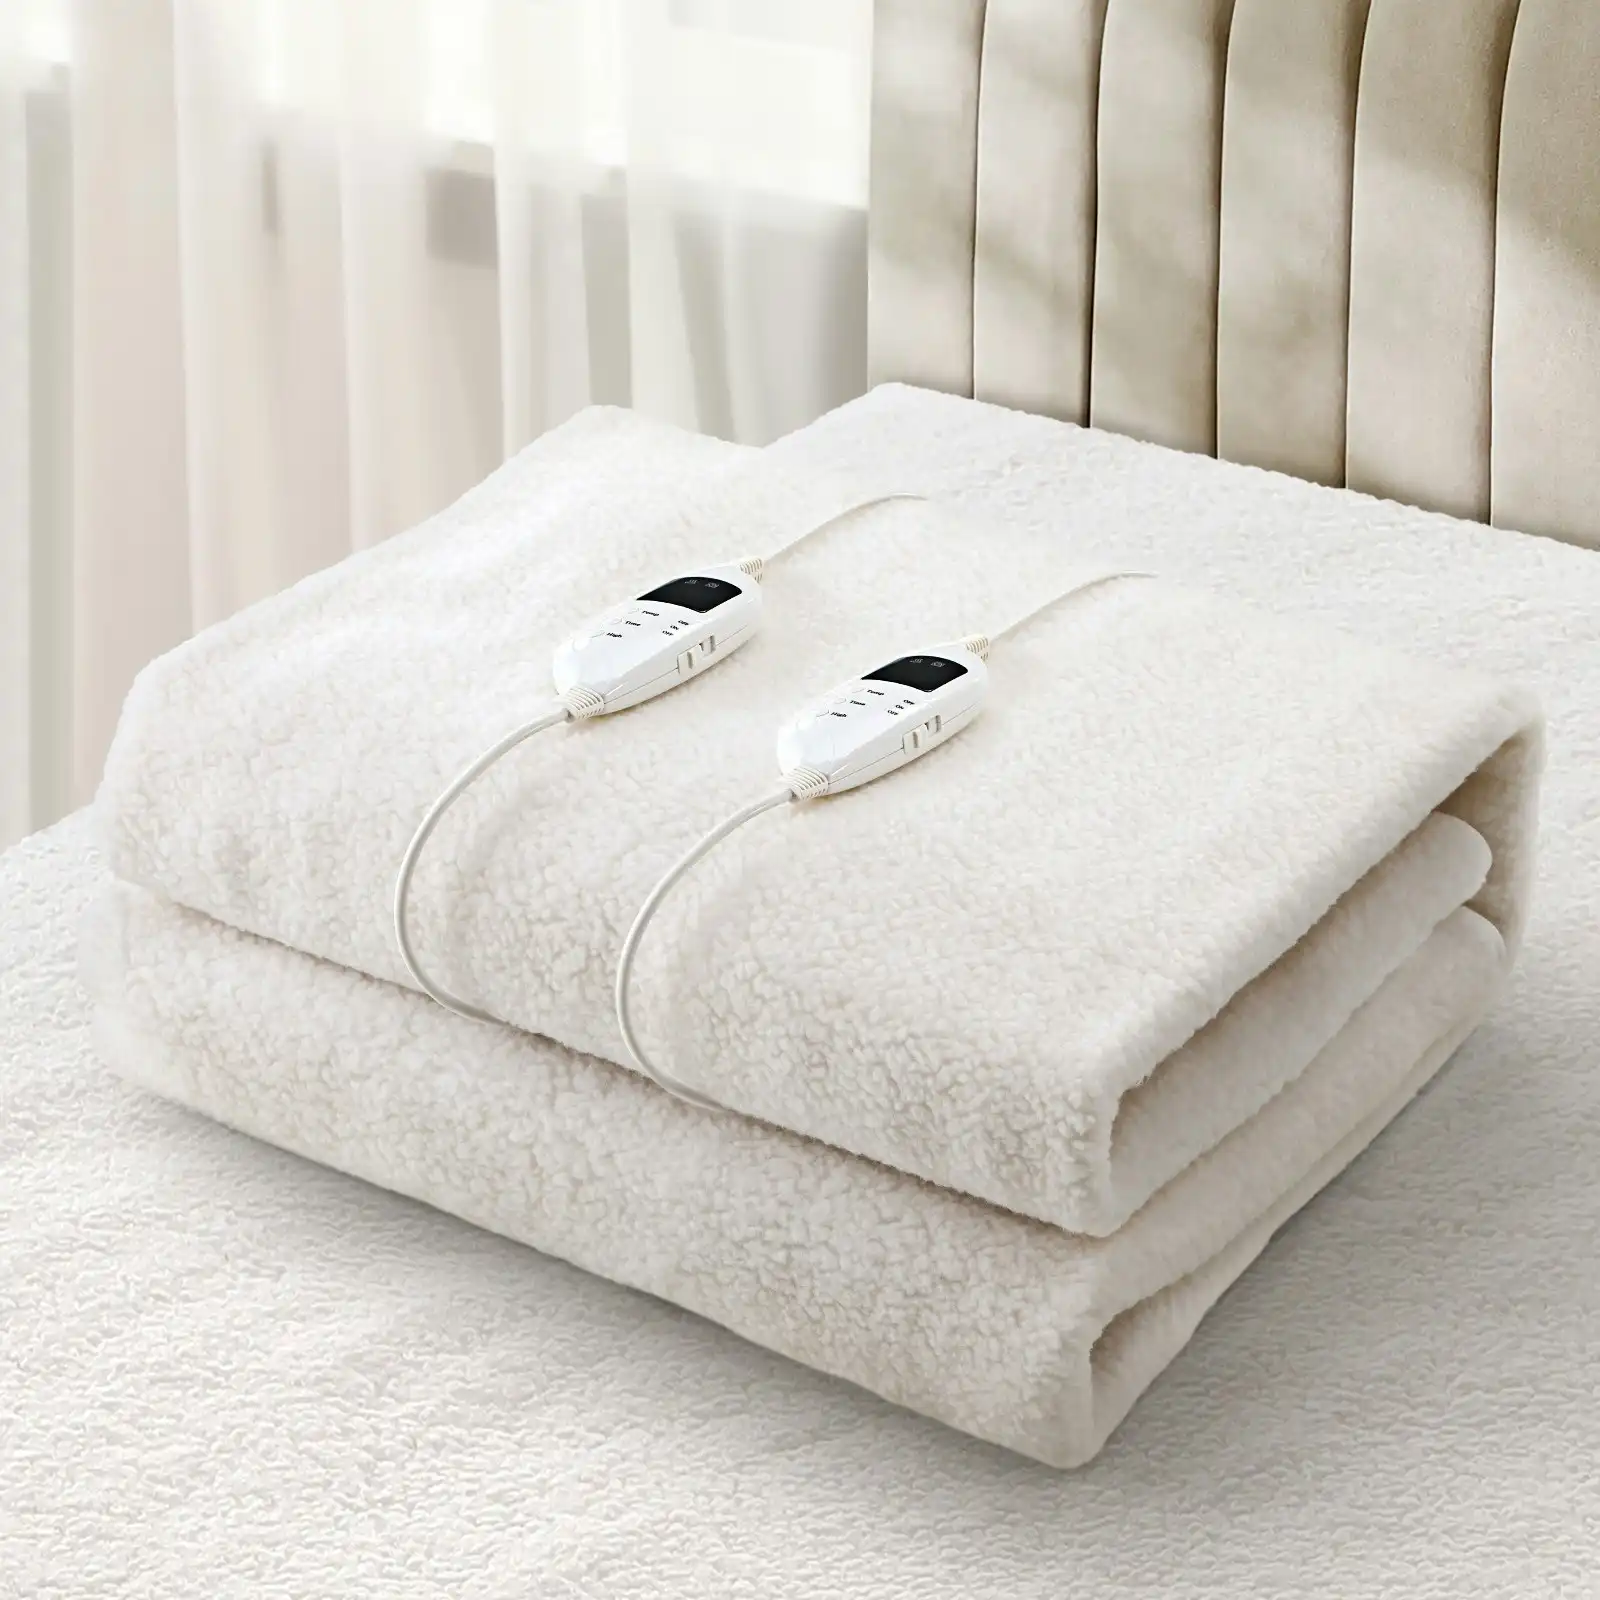 Bedra Electric Blanket Washable Fleece Heated Fully Fitted Winter Pad Queen